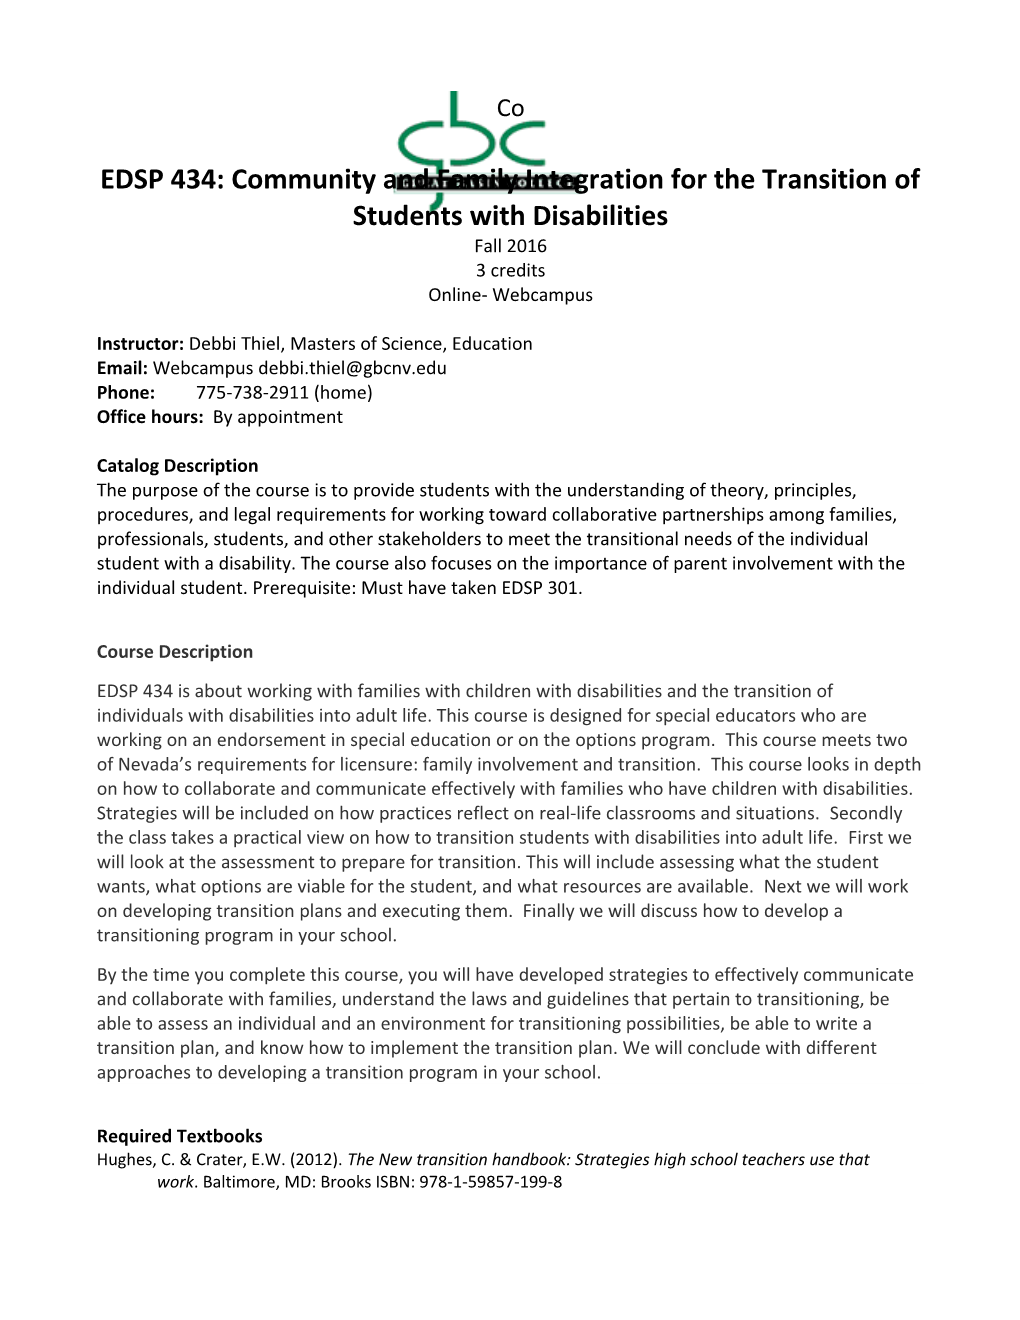 EDSP 434: Community and Family Integration for the Transition of Students with Disabilities